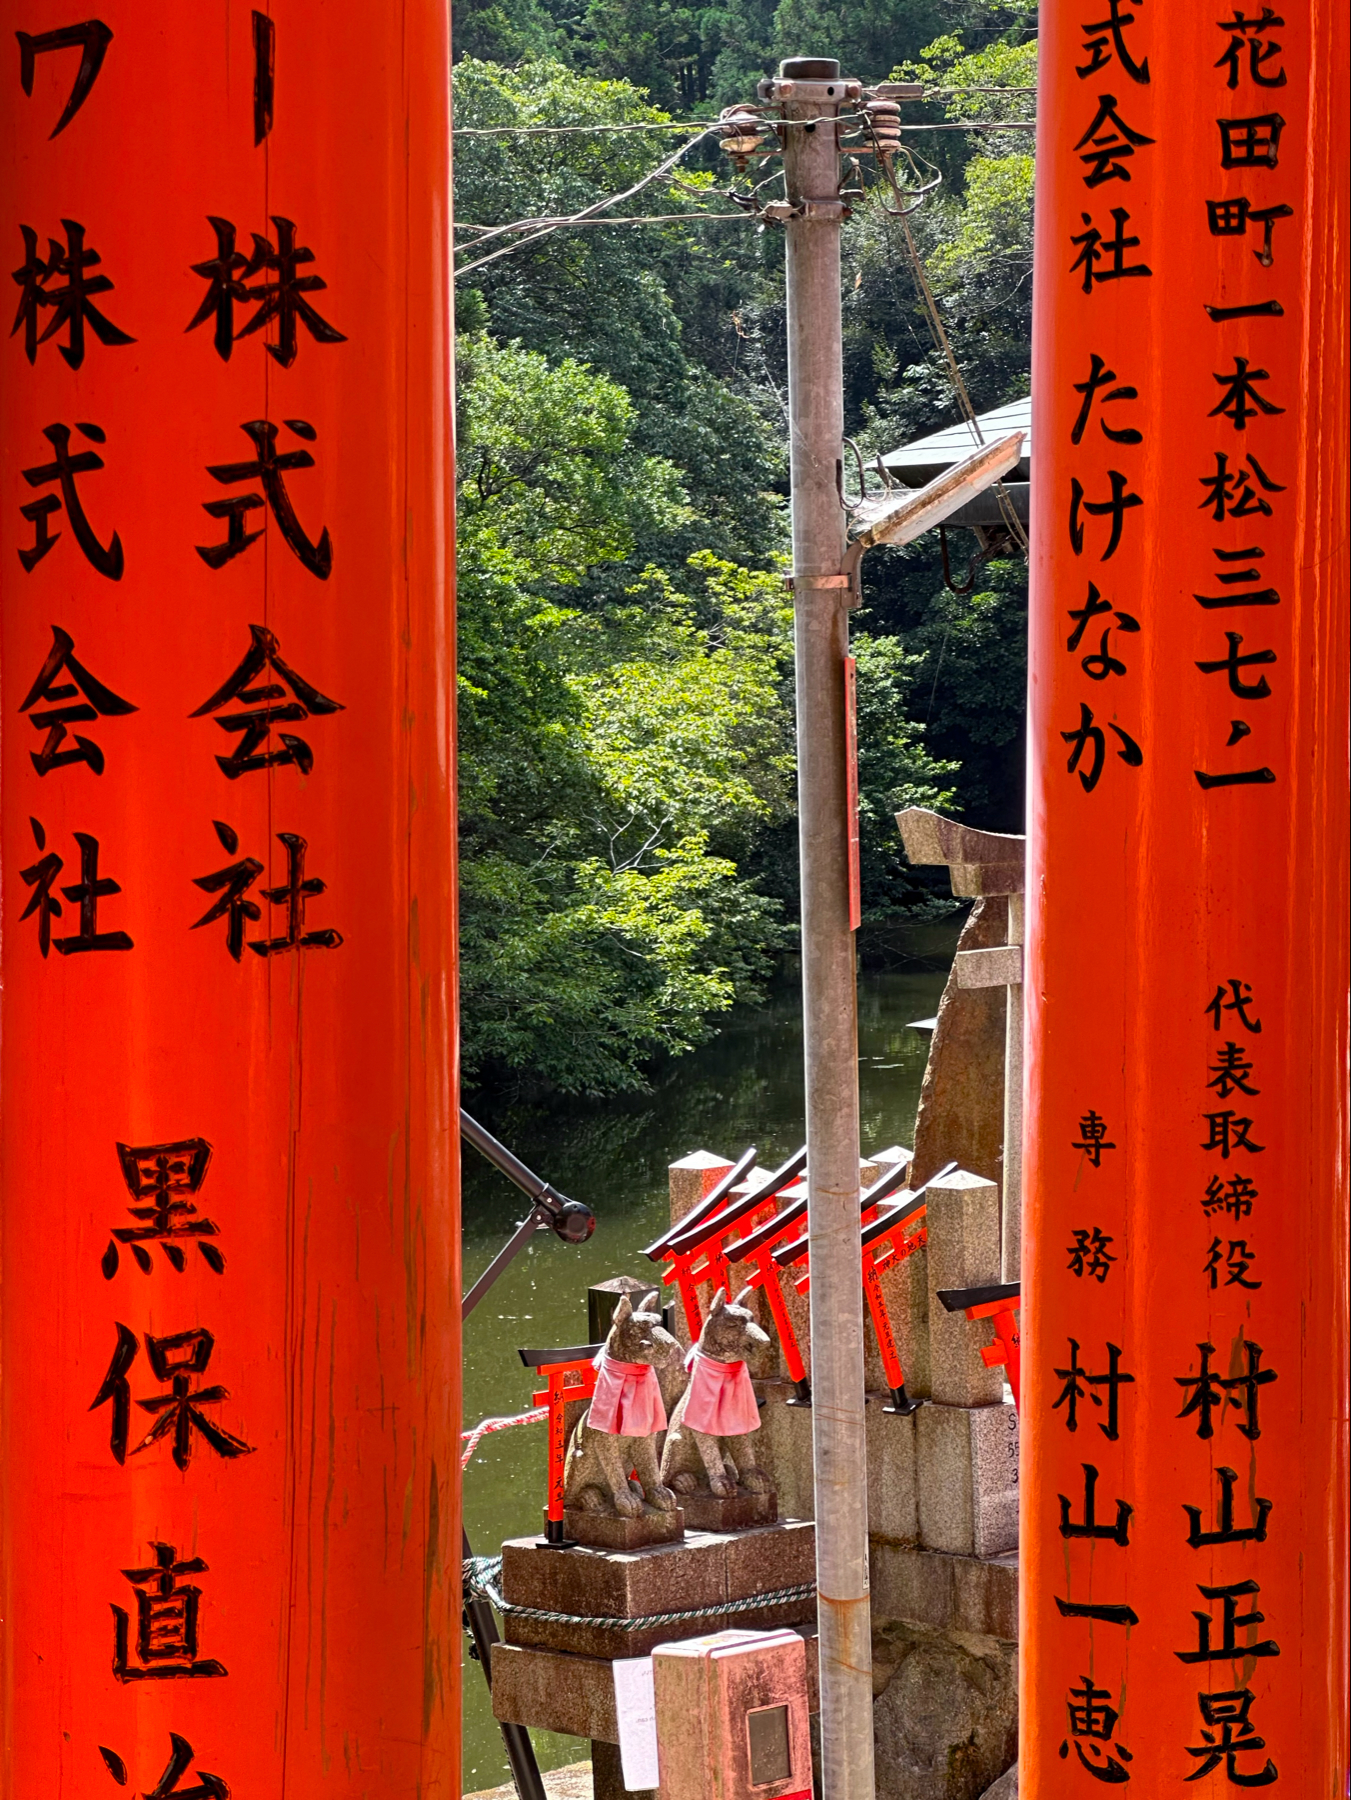 This image shows a pair of vibrant orange torii gates with black Japanese characters on them. Between the gates, a utility pole with wires is seen against a backdrop of lush green trees. Below, two traditional stone fox statues, dressed in red bibs